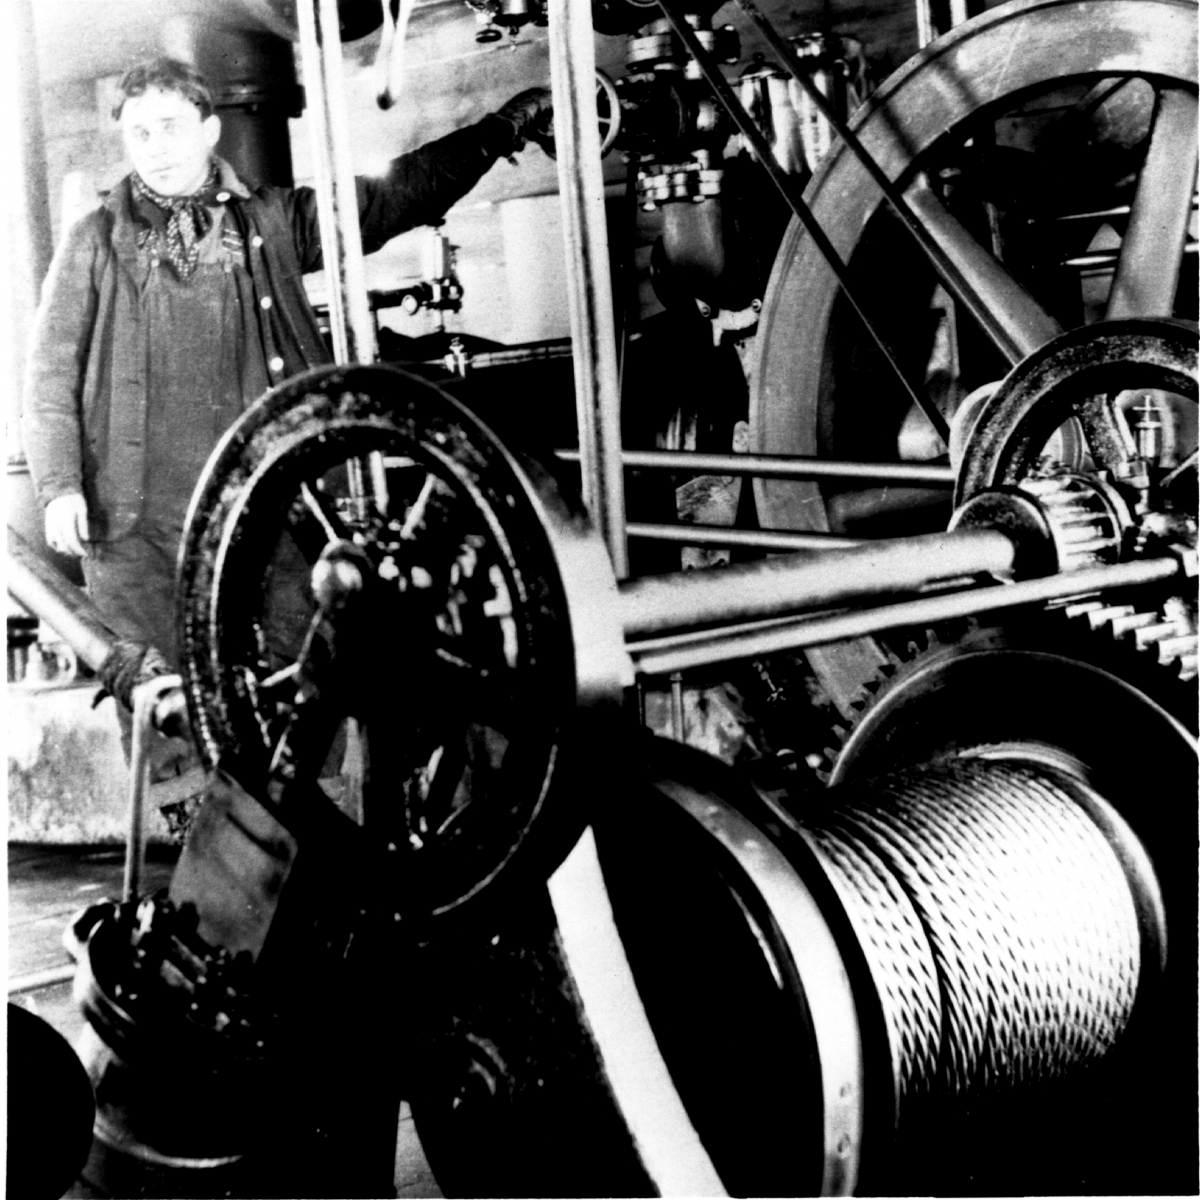 Archival photo of worker standing by industrial machine